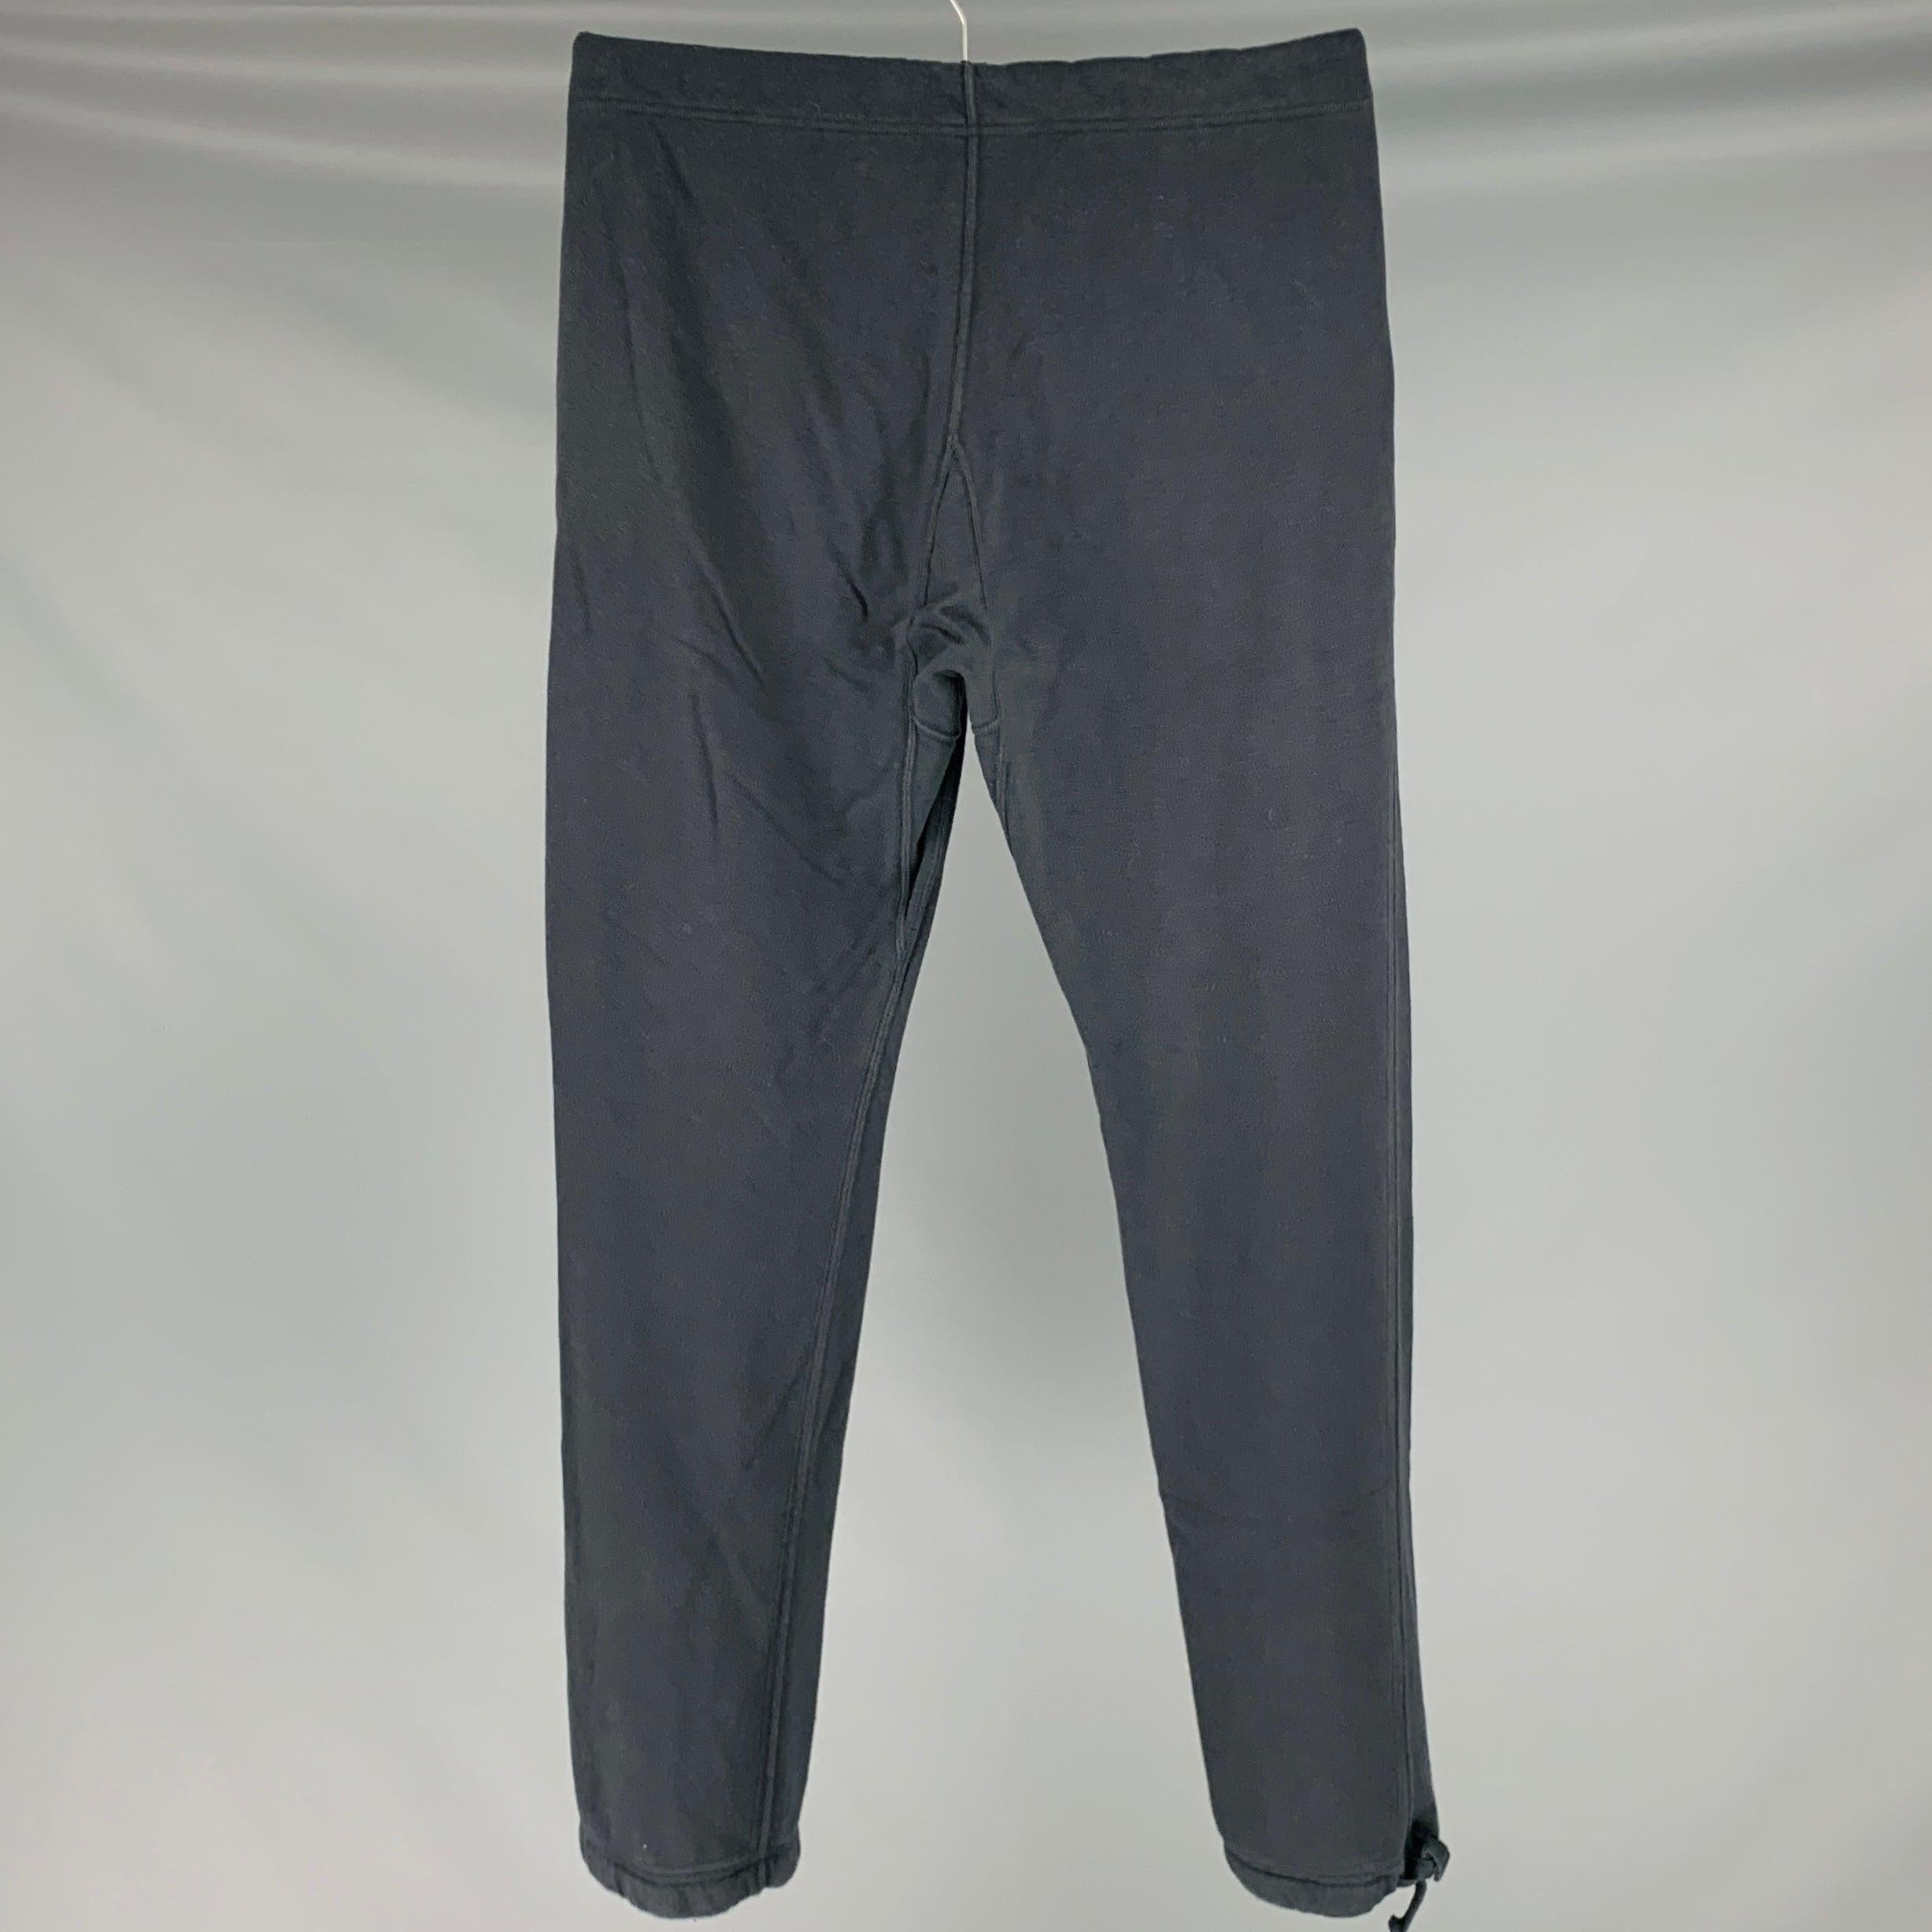 VISIM casual pants
in a
black cotton cashmere blend knit featuring a sweatpants style, and drawstring cuffs and closure. Made in Japan.New With Tags. 

Marked:   JP 2 

Measurements: 
  Waist: 44 inches Rise: 10 inches Inseam: 32 inches Leg Opening: